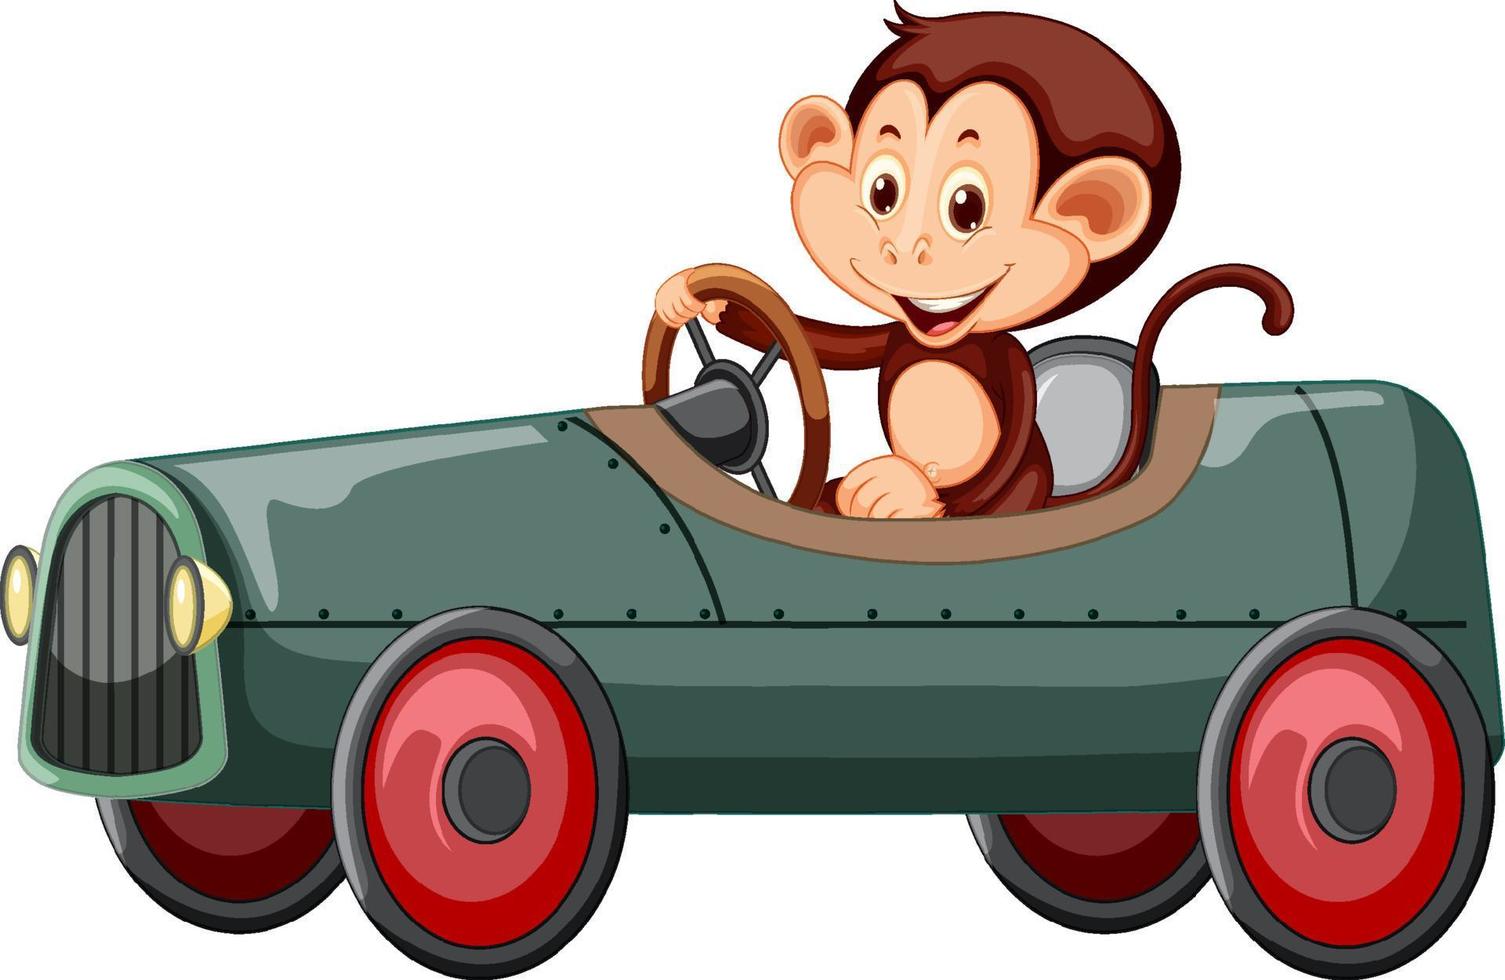 Cute monkey driving race car on white background vector